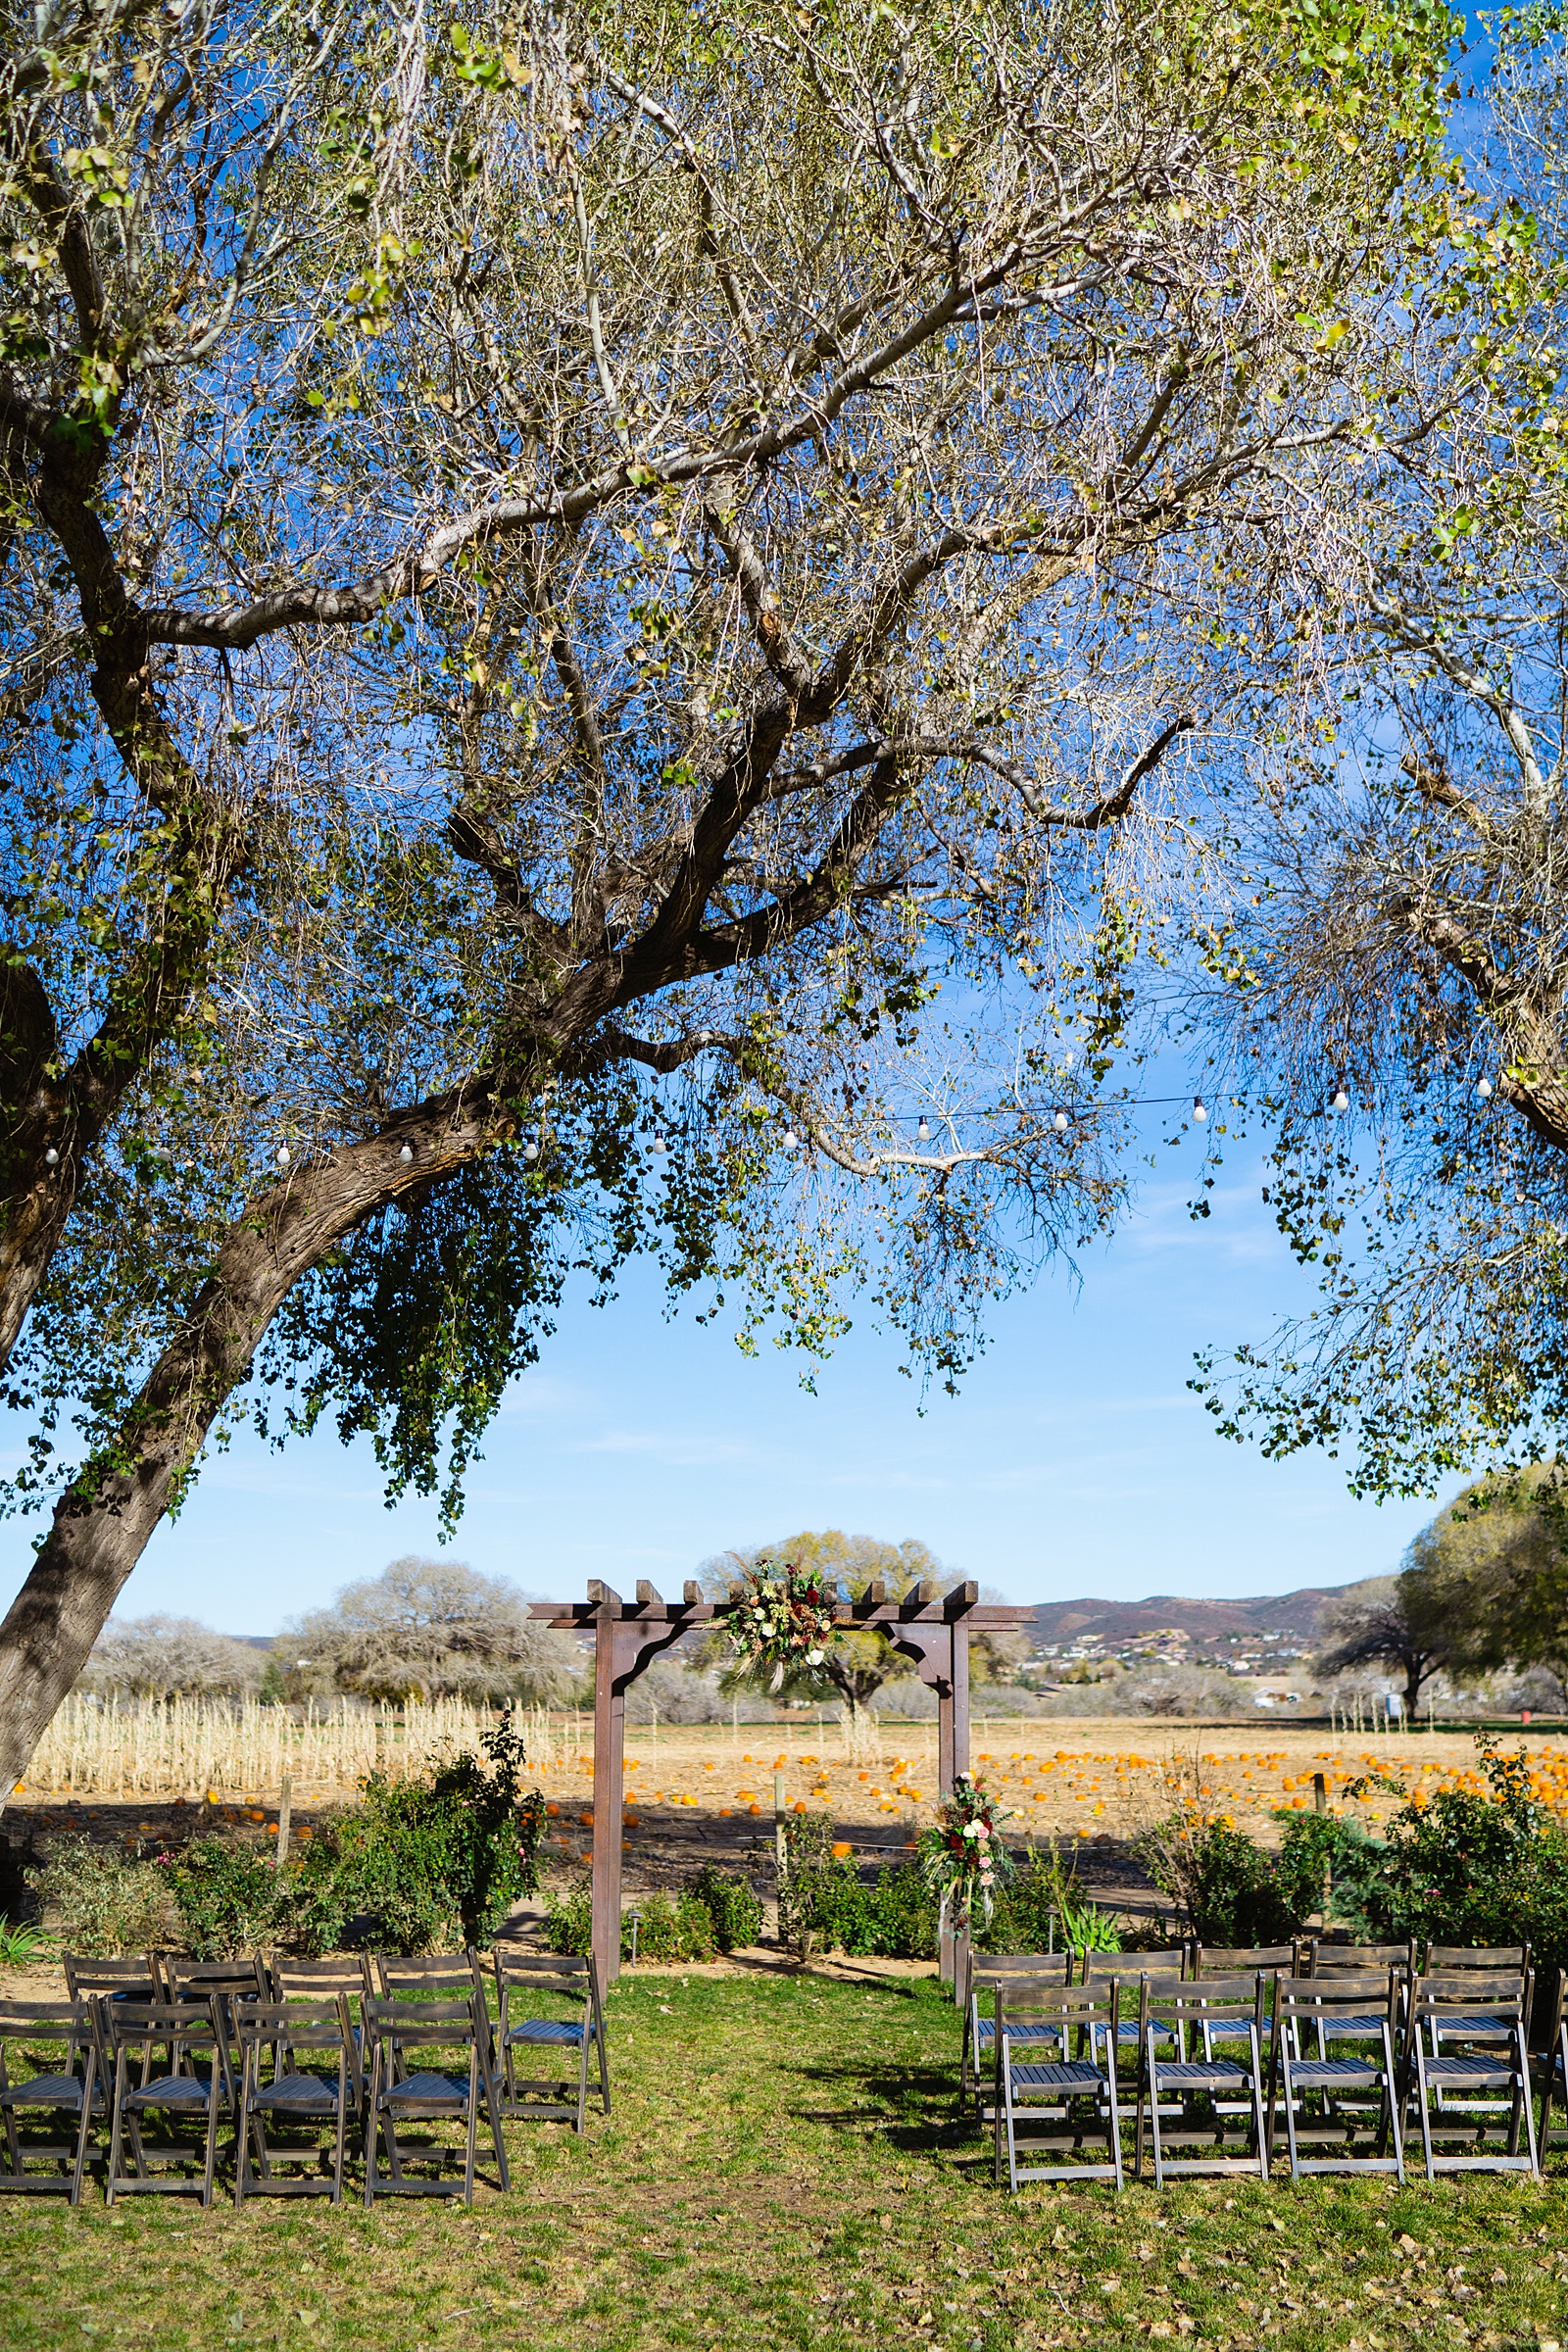 Ceremony site arch and tree at Wedding ceremony at Mortimer Farms by Arizona wedding photographer PMA Photography.